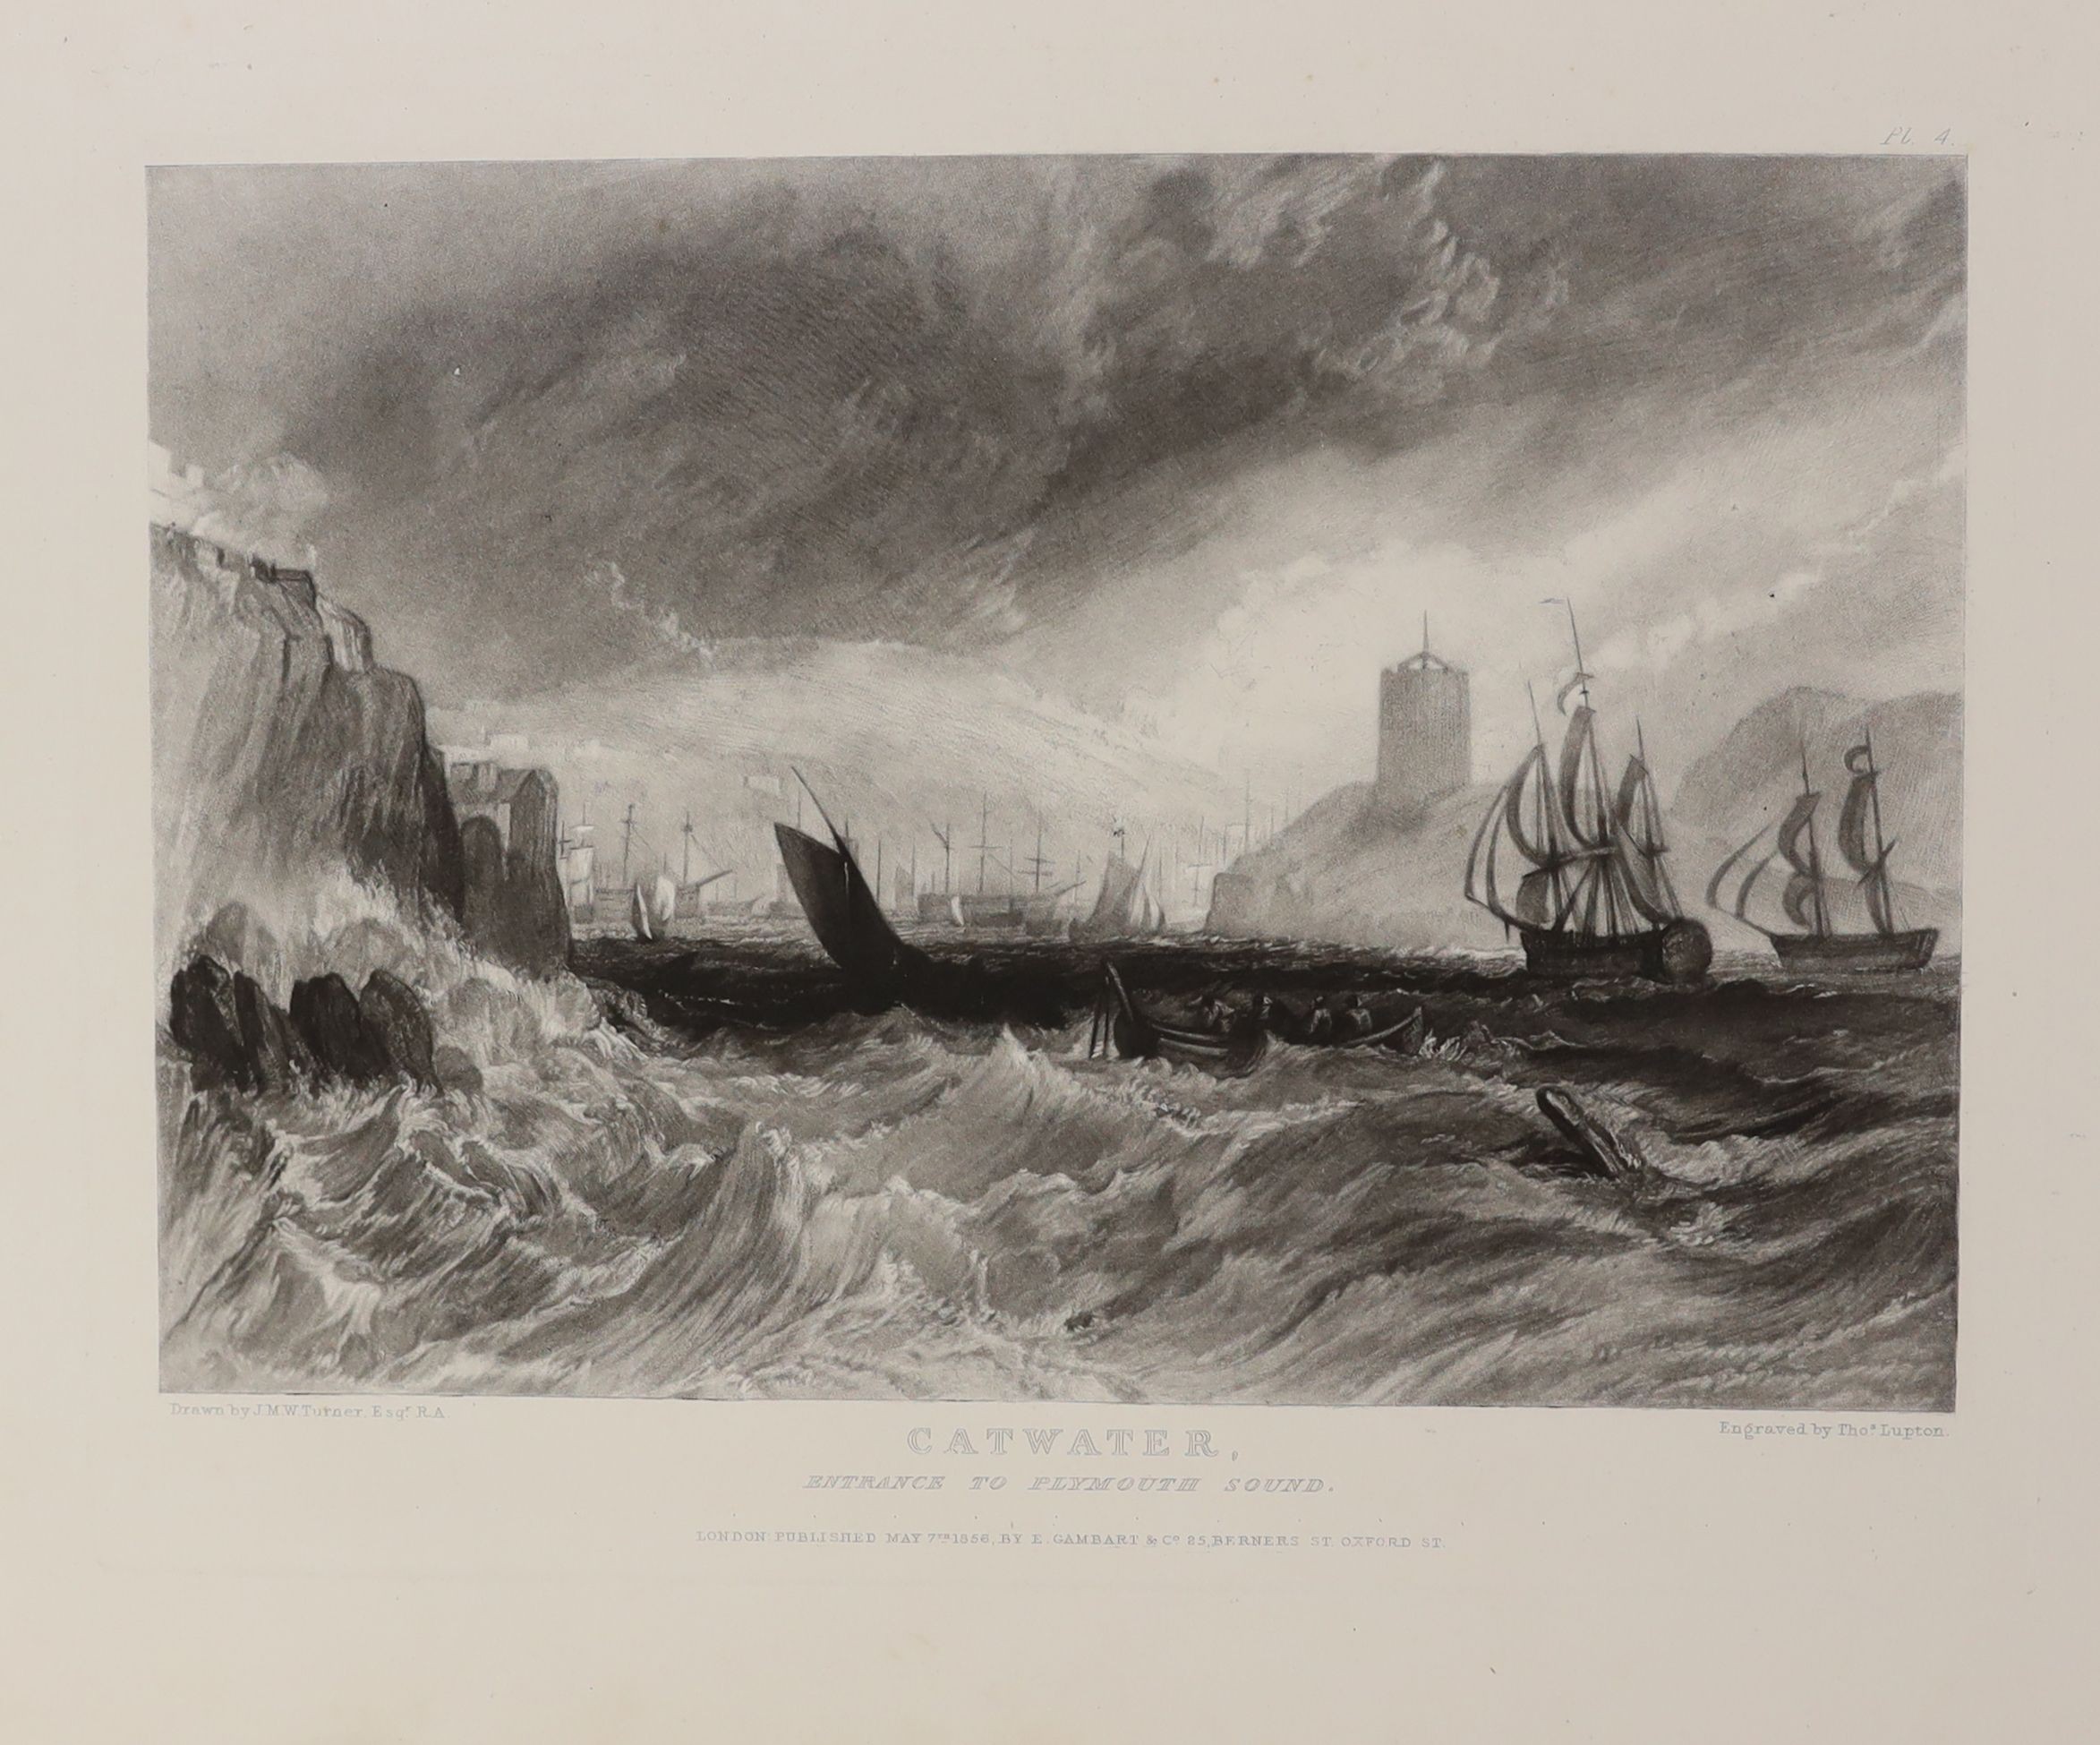 Ruskin, John - The Harbours of England, illustrated by J.M.W. Turner, folio, original green cloth gilt, with 12 plates, E. Gambart and Co., London, 1856